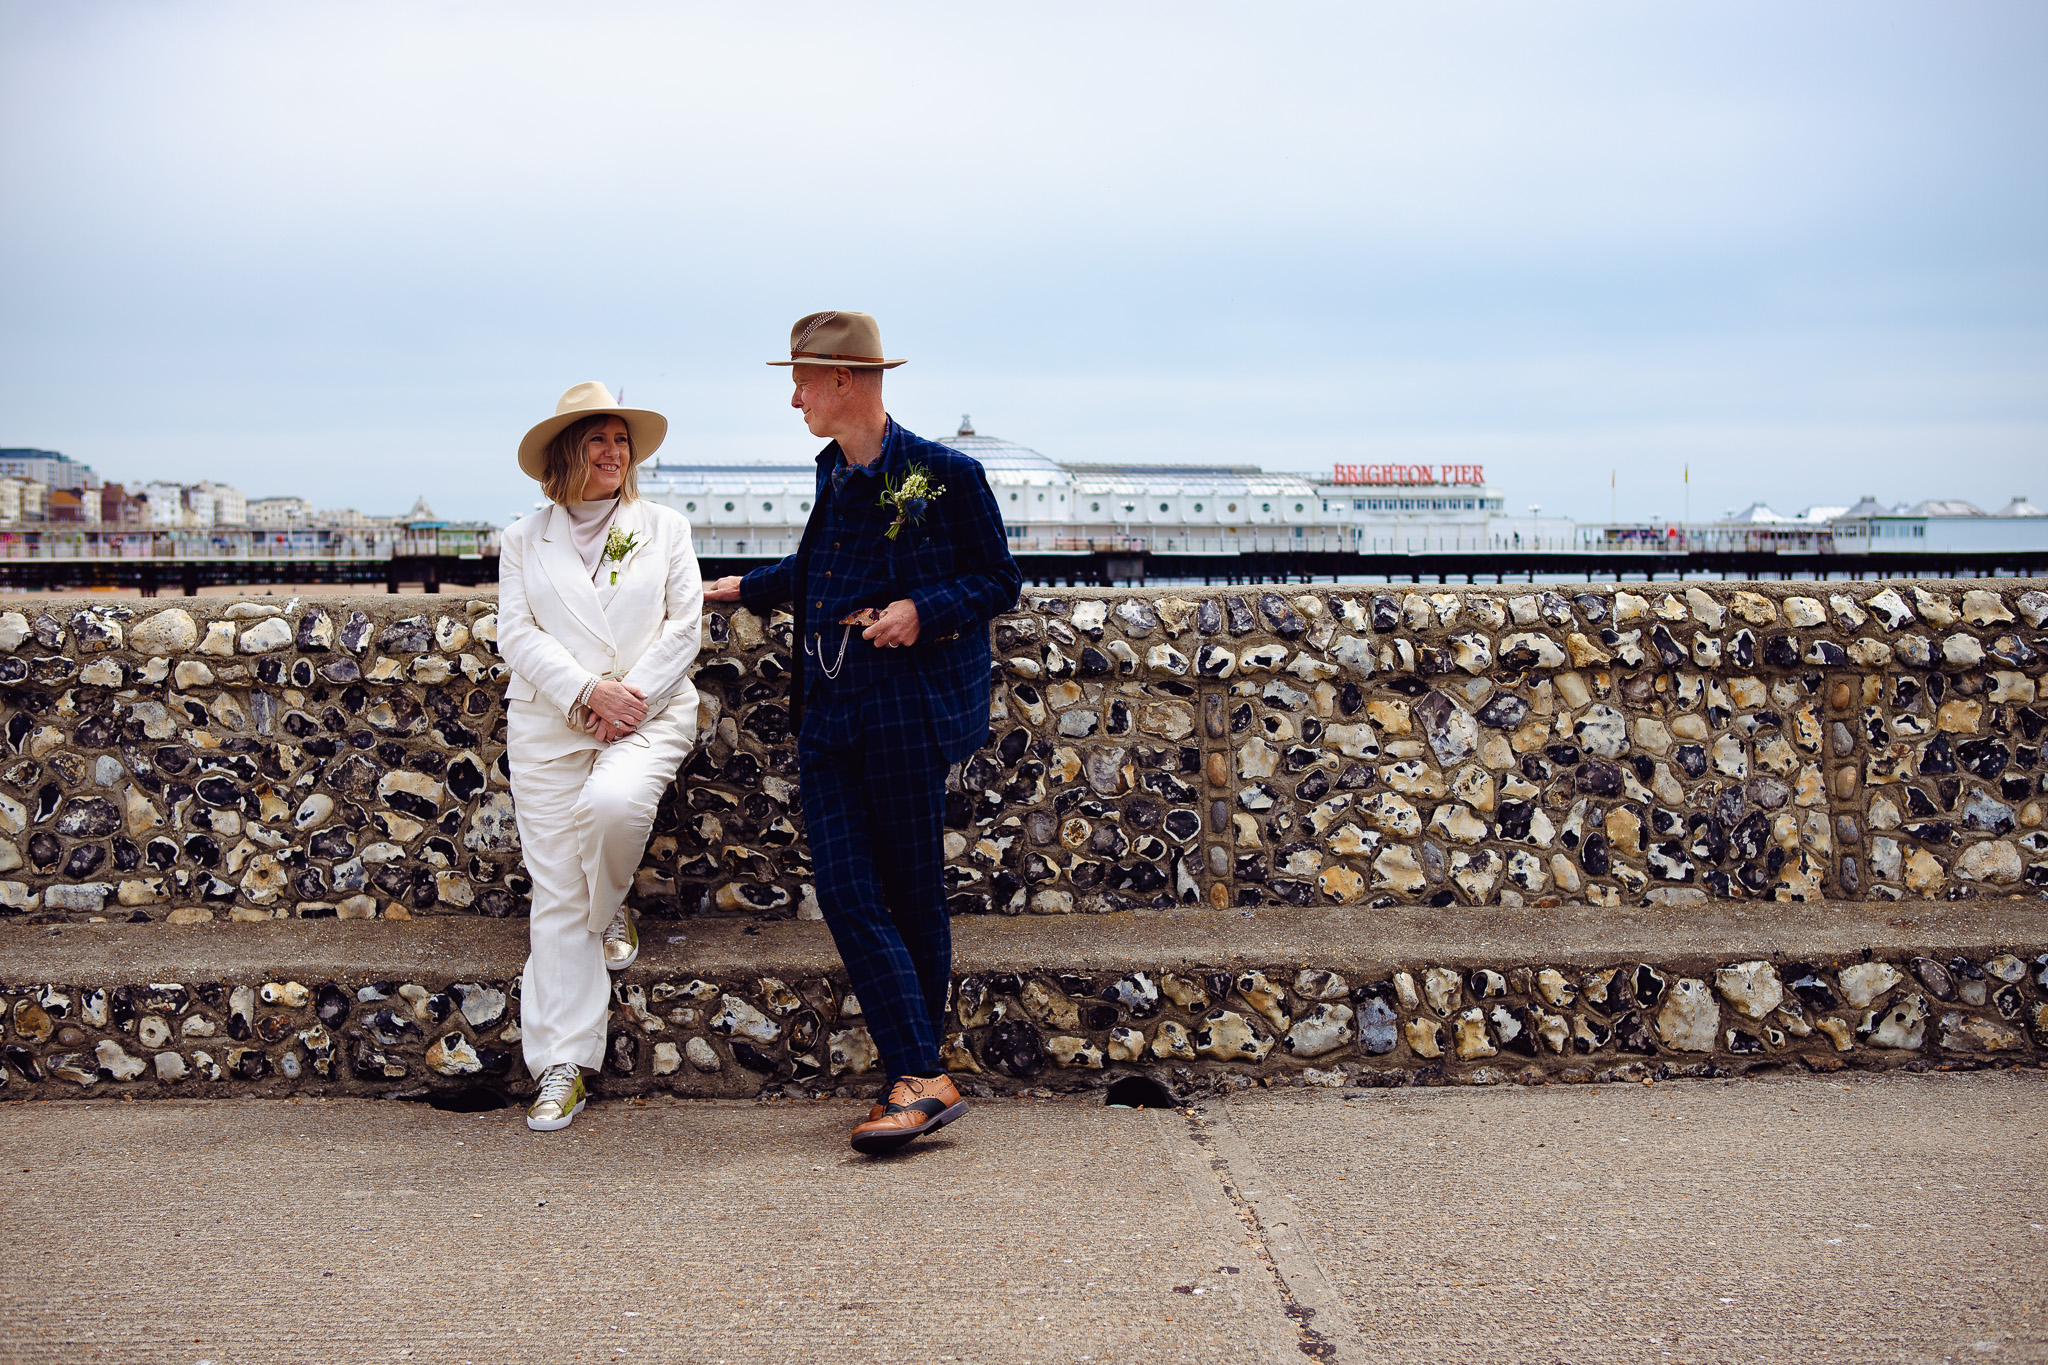 Mary and Mike pose in front of a stone wall near Brighton pier during their wedding couple portrait session.